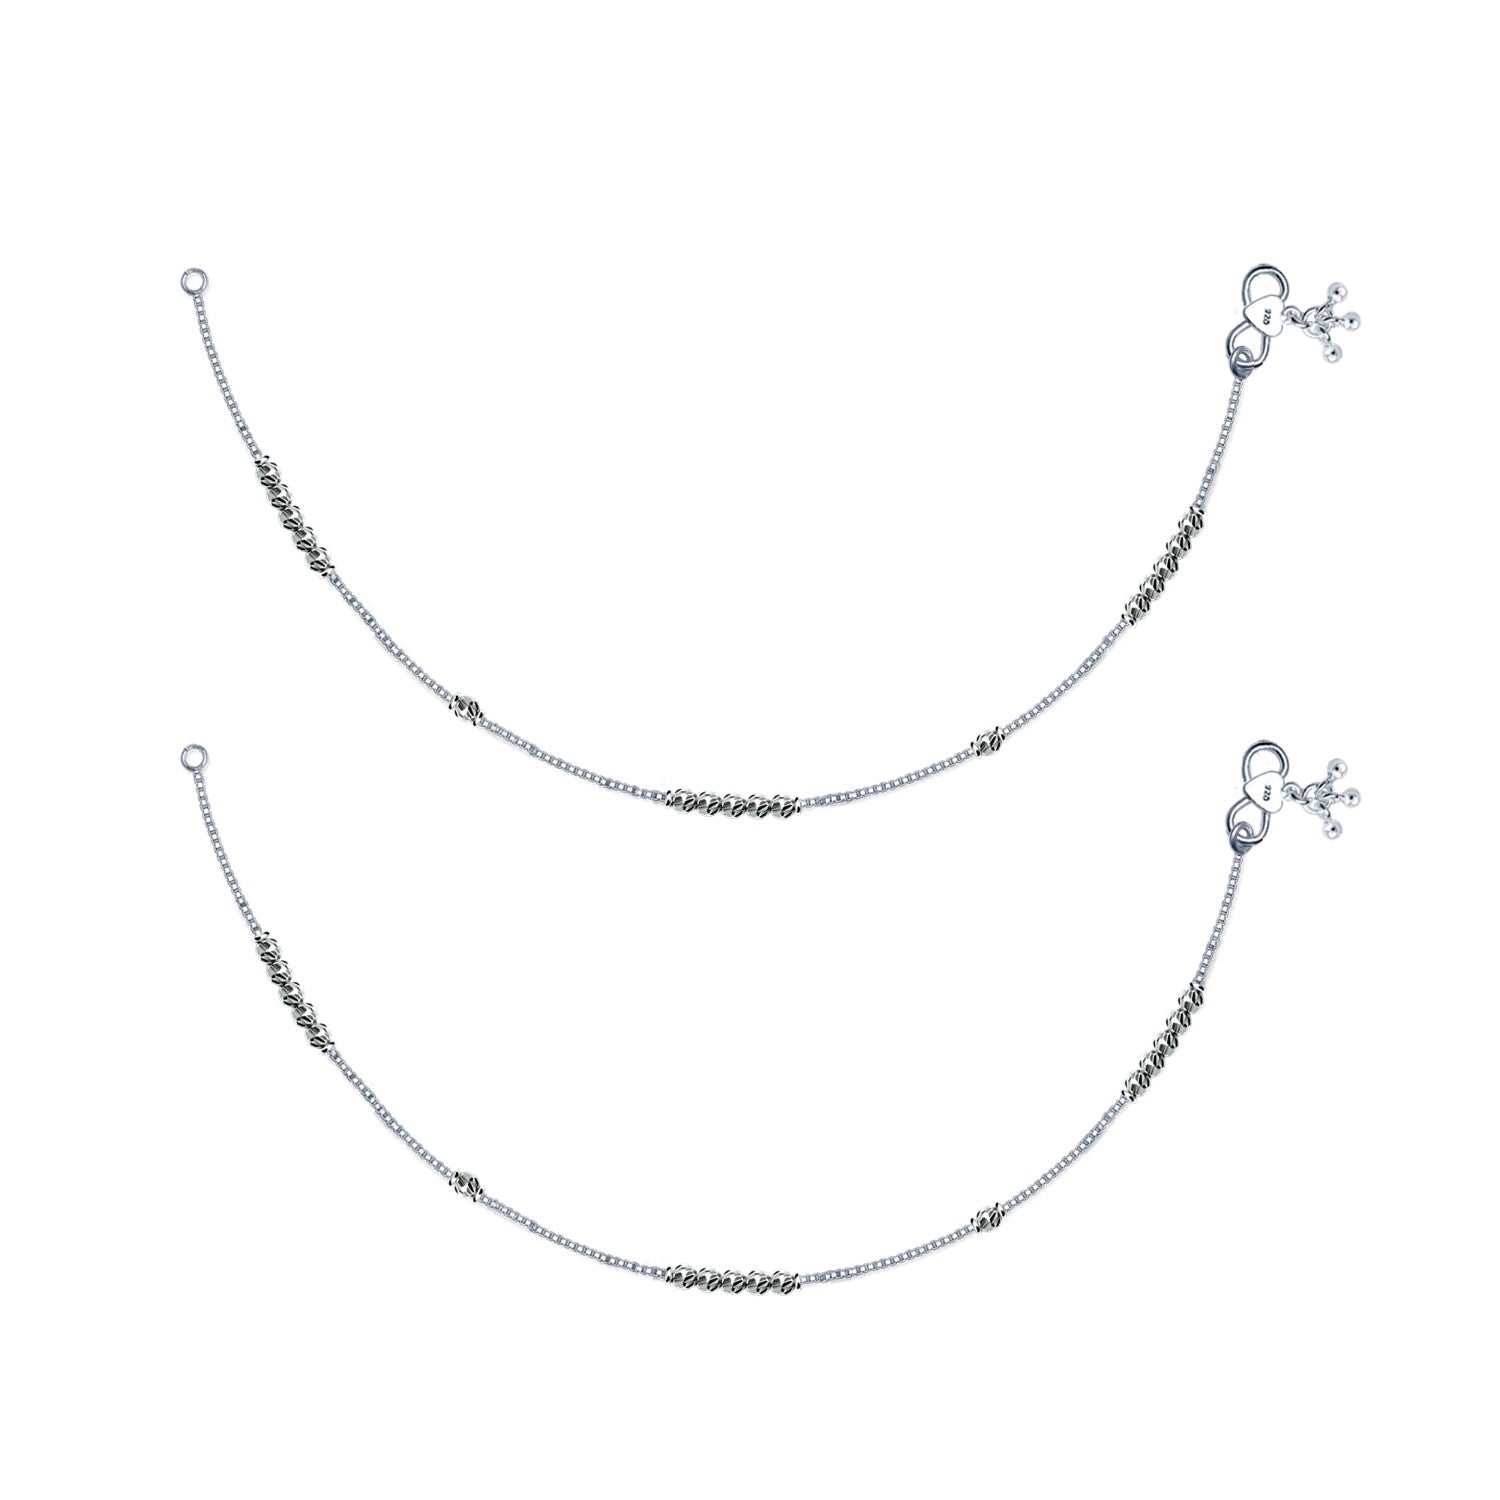 925 Sterling Silver Modern Diamond Cut Bead Anklets for Women And Girls